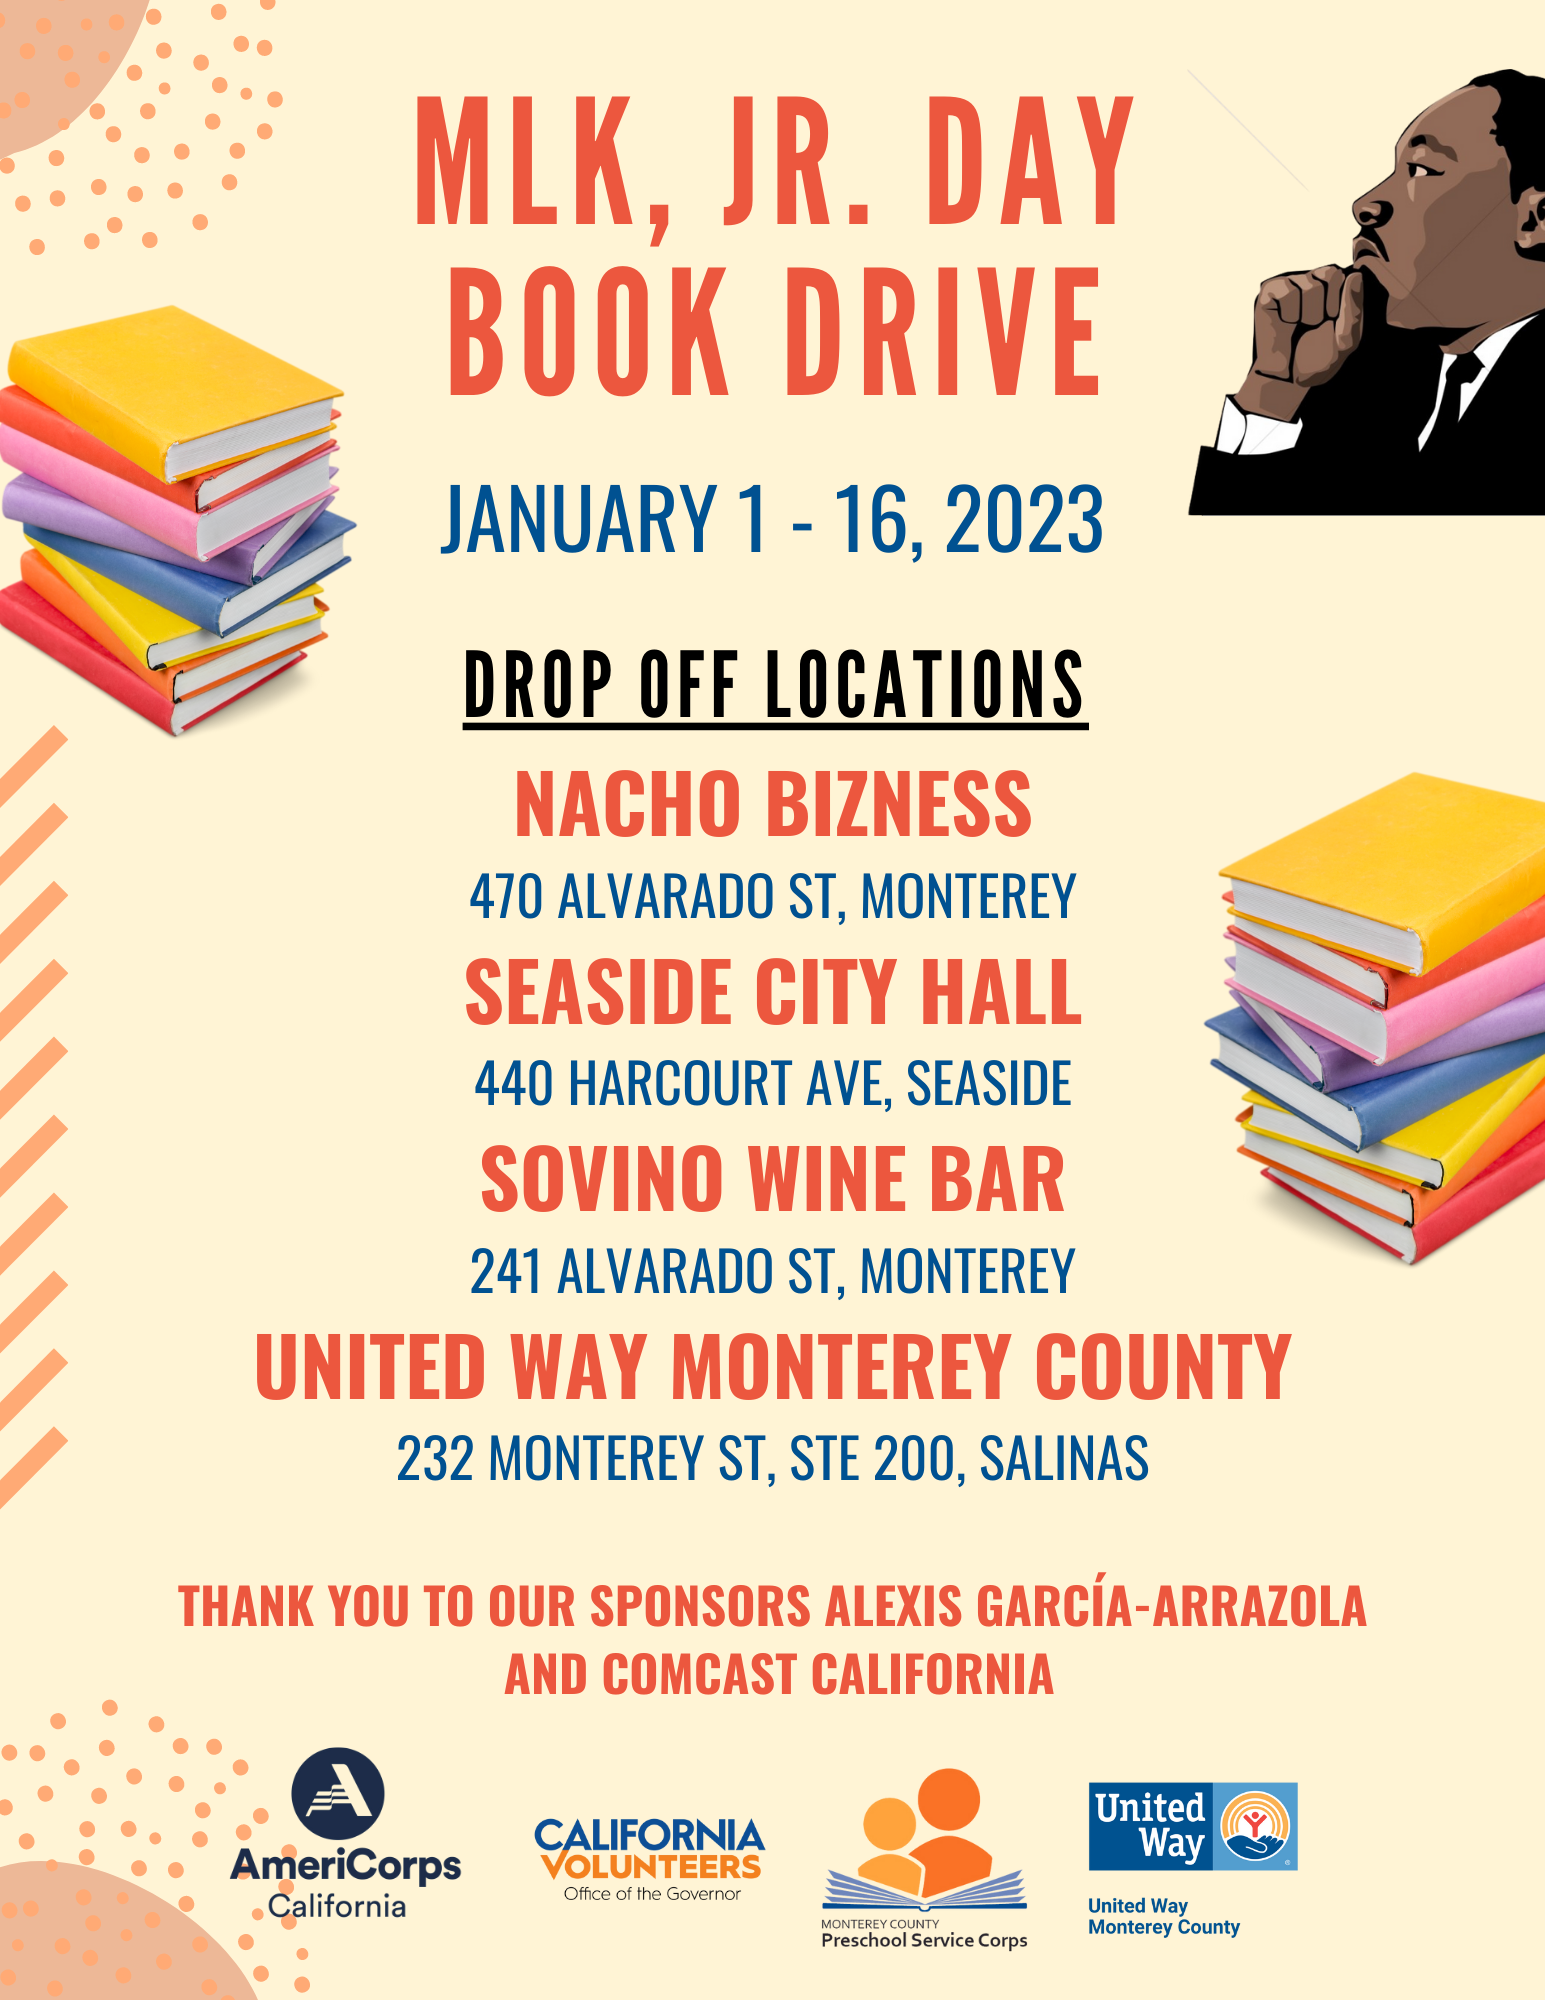 Book Drive Locations